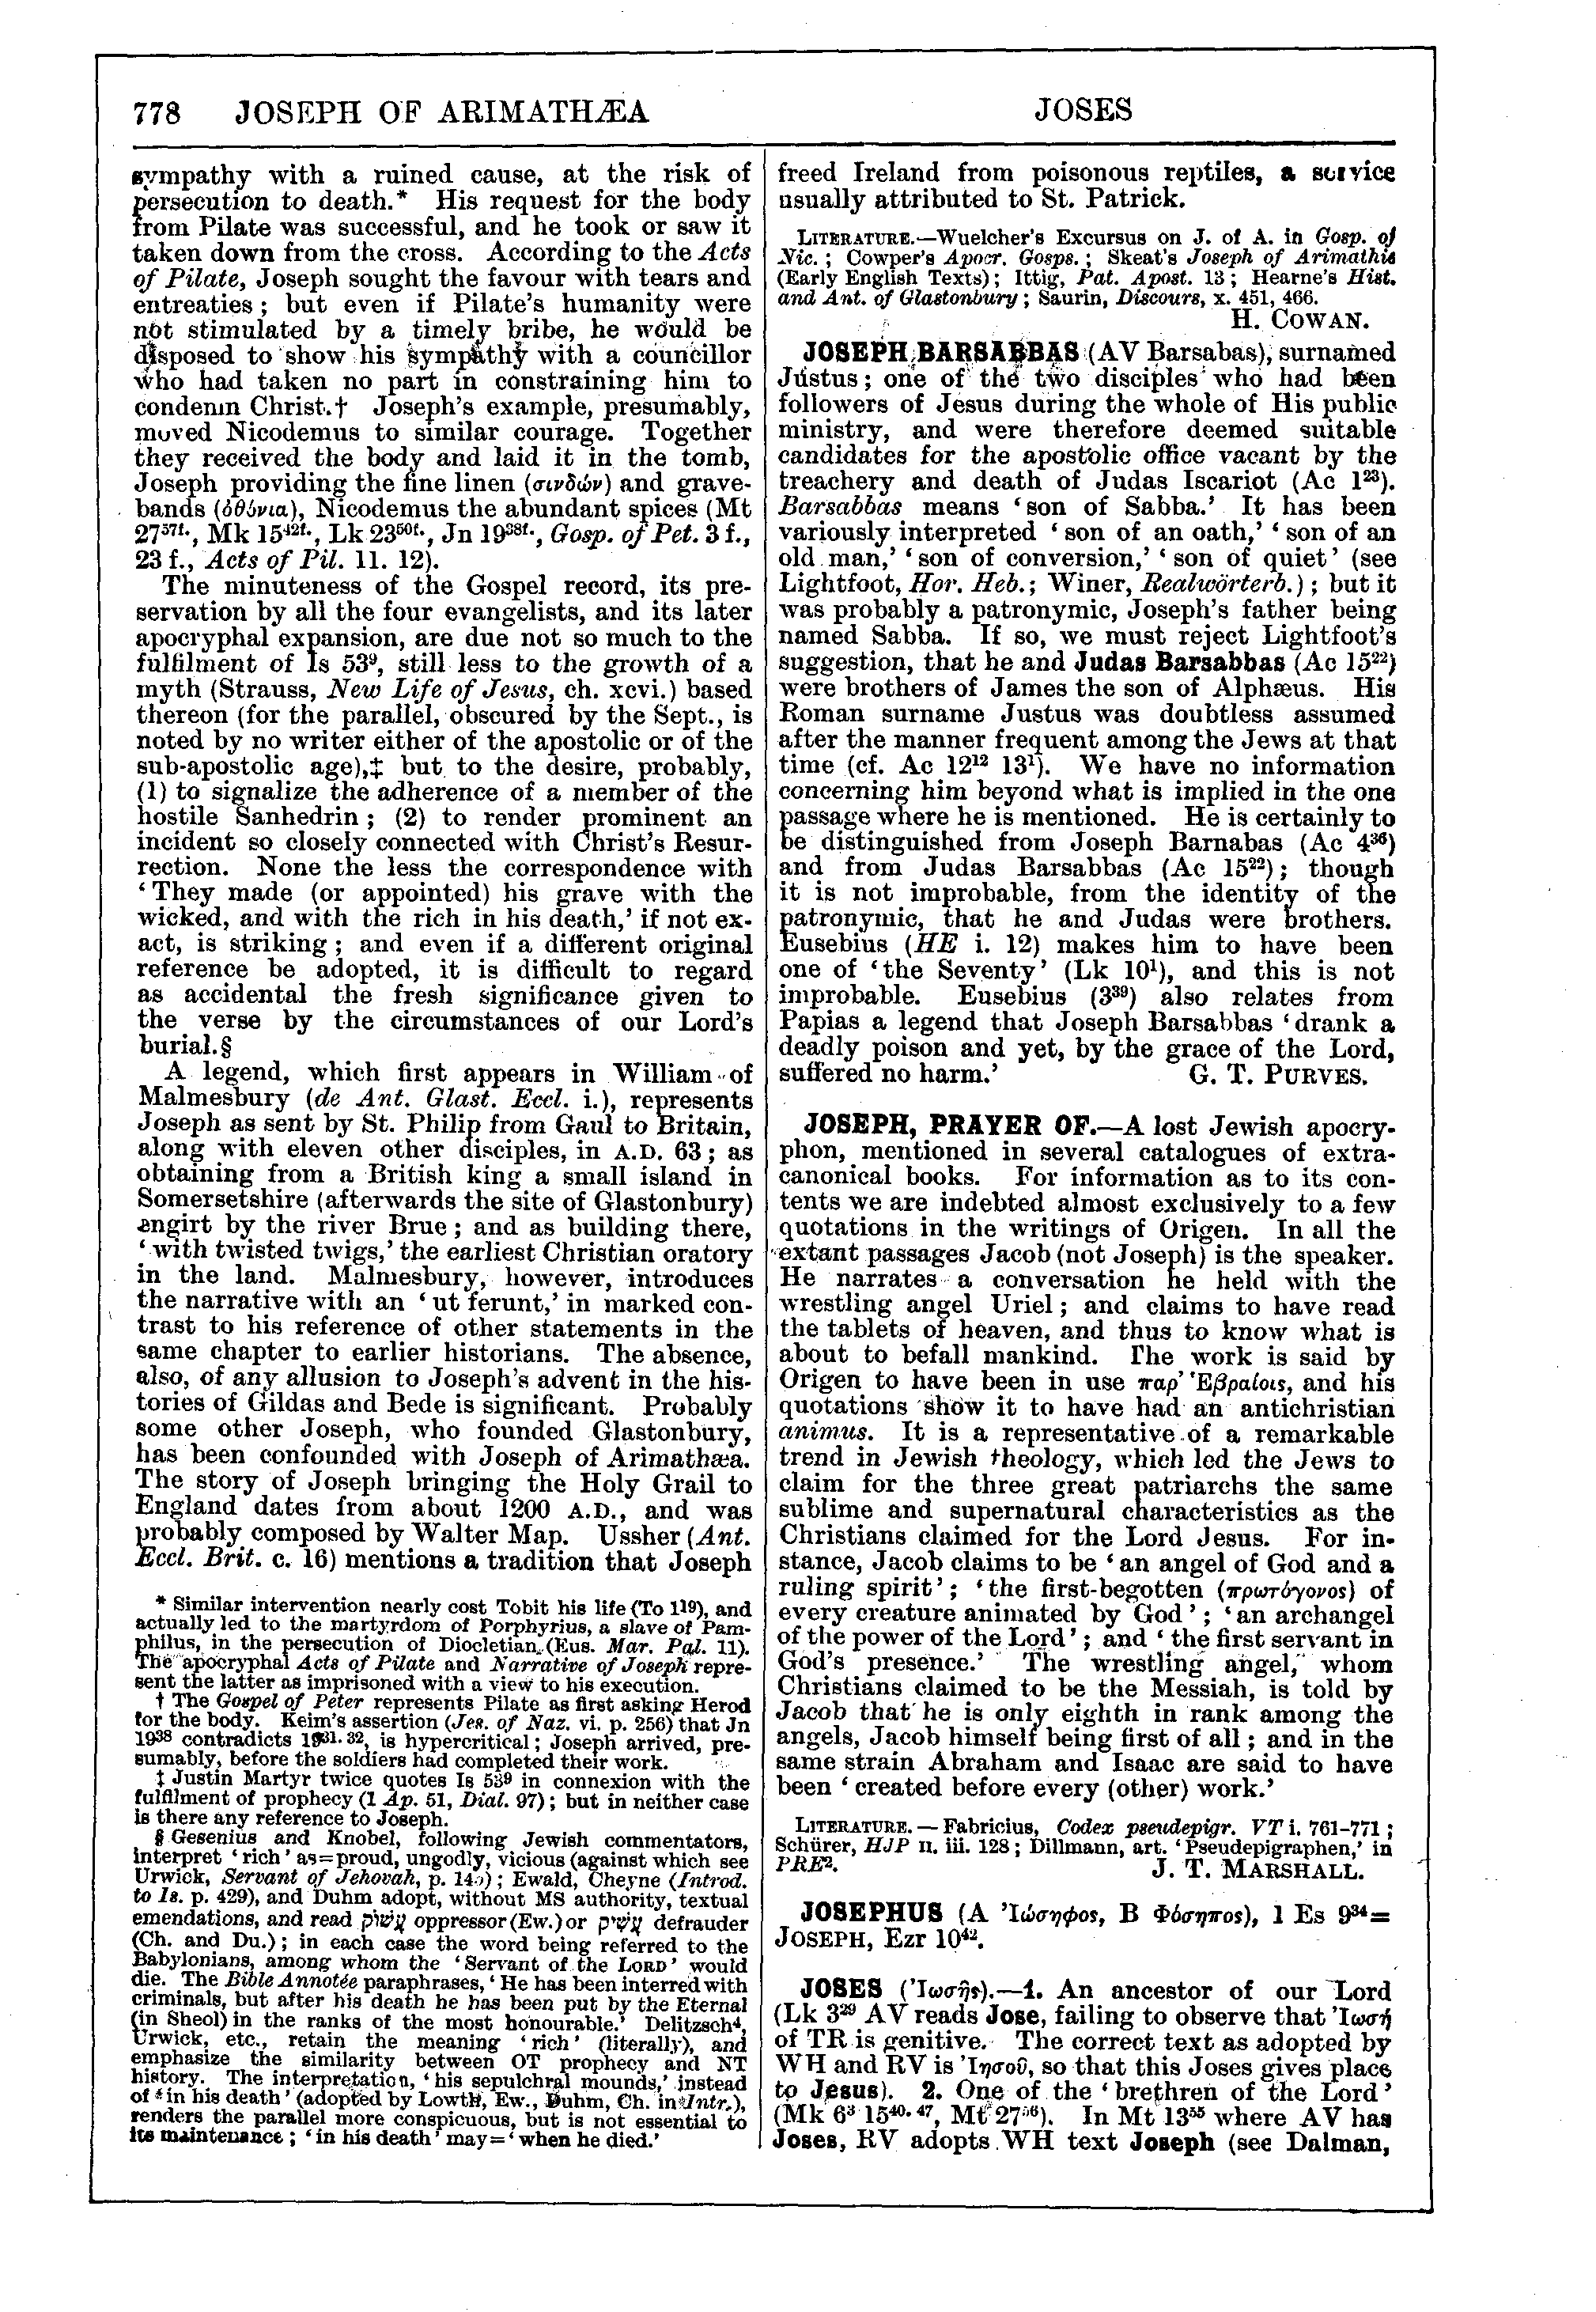 Image of page 778